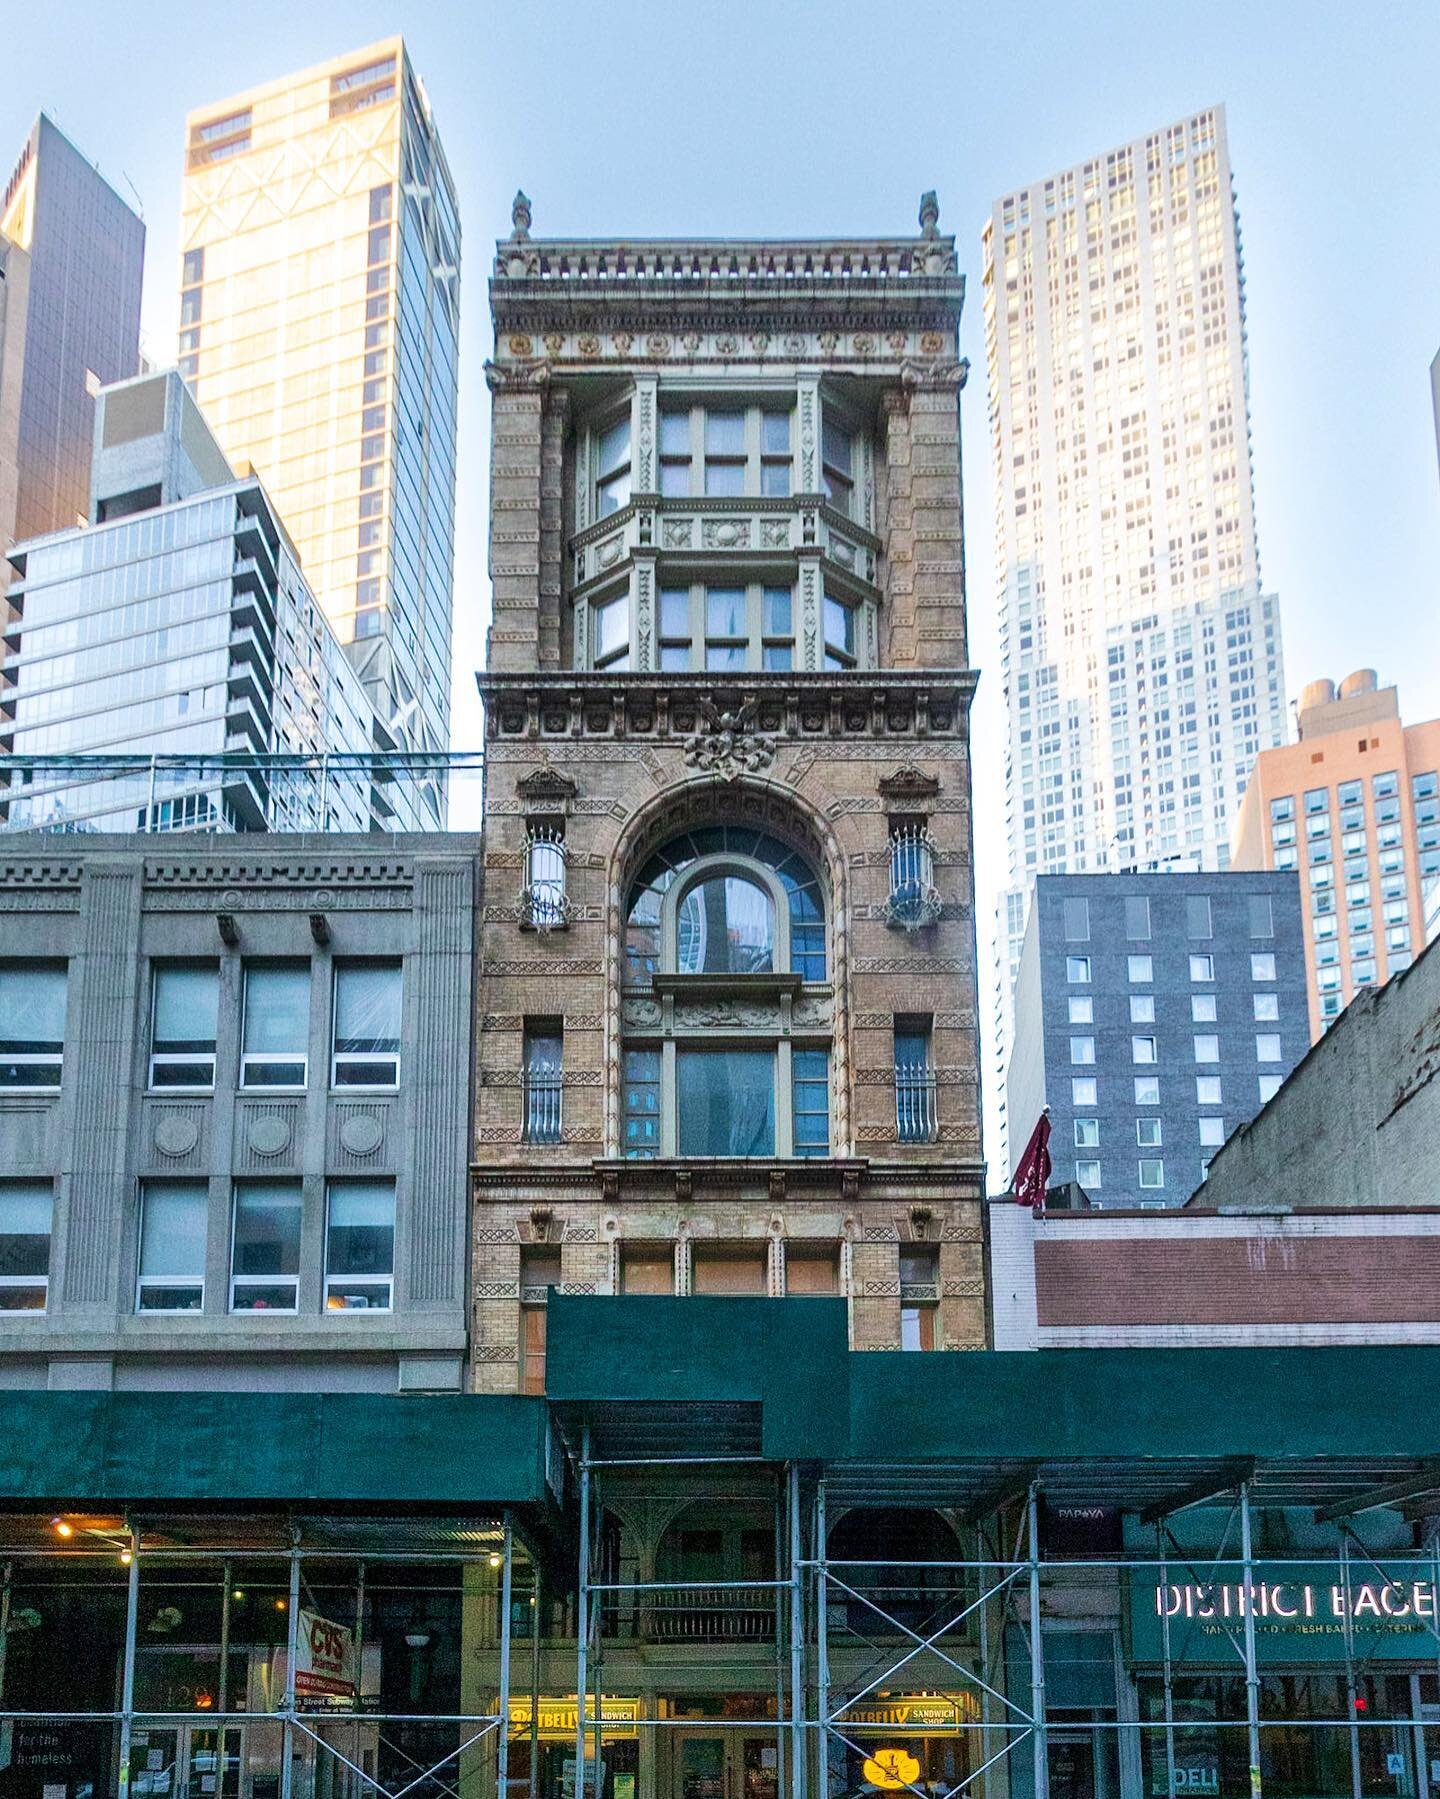 In the steel canyons of lower Manhattan it can be odd to see an eight story office building but in the late 1800s, these would have been a normal site. This particular building was home to the Keuffel and Esser company who specializes in drafting and